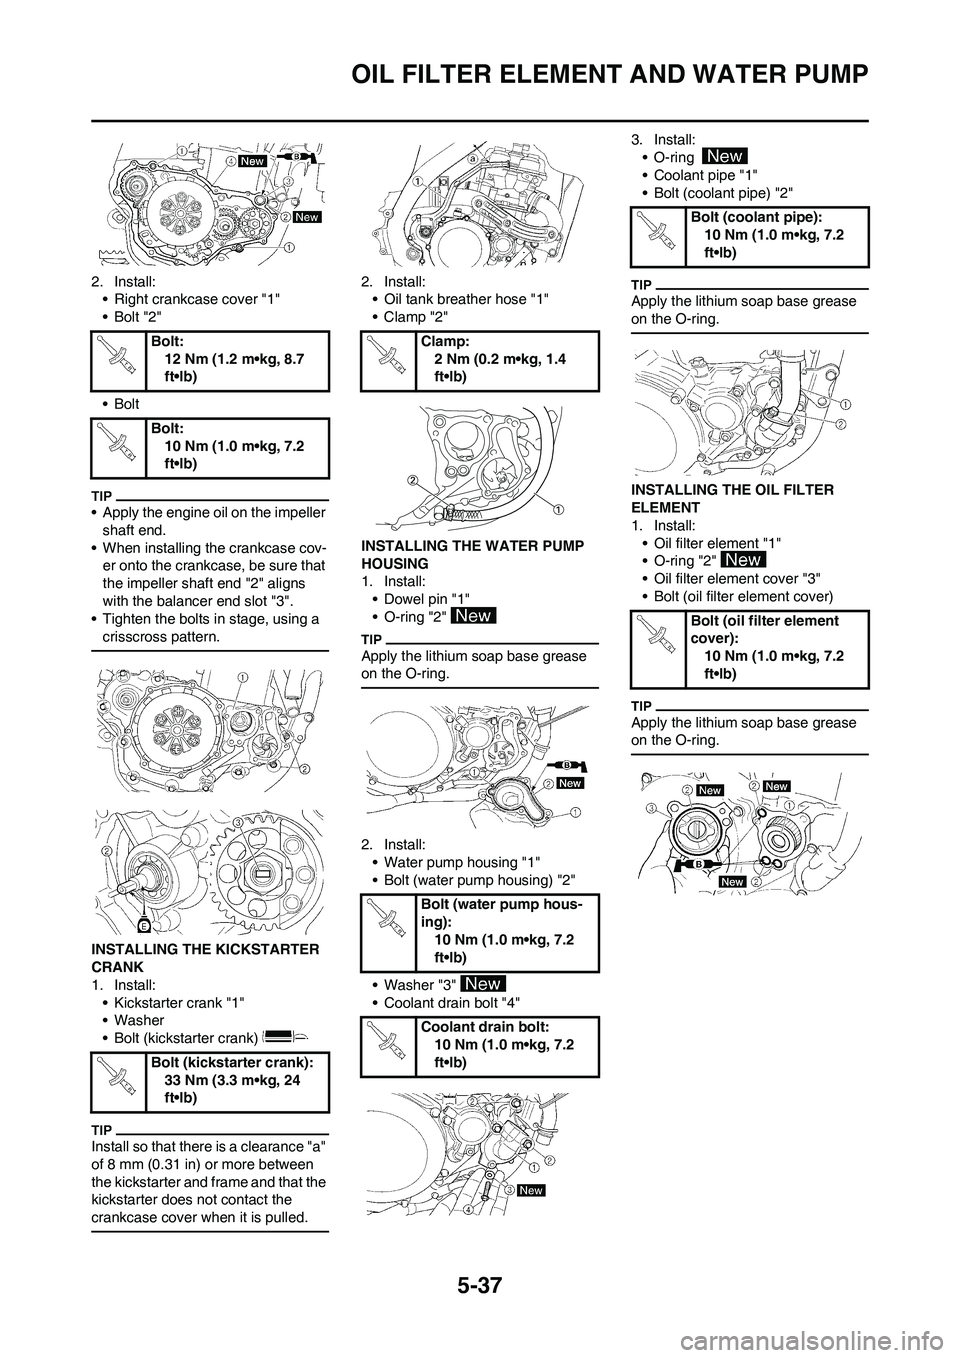 YAMAHA WR 450F 2010 Owners Guide 5-37
OIL FILTER ELEMENT AND WATER PUMP
2. Install:
• Right crankcase cover "1"
•Bolt "2"
•Bolt
• Apply the engine oil on the impeller 
shaft end.
• When installing the crankcase cov-
er onto